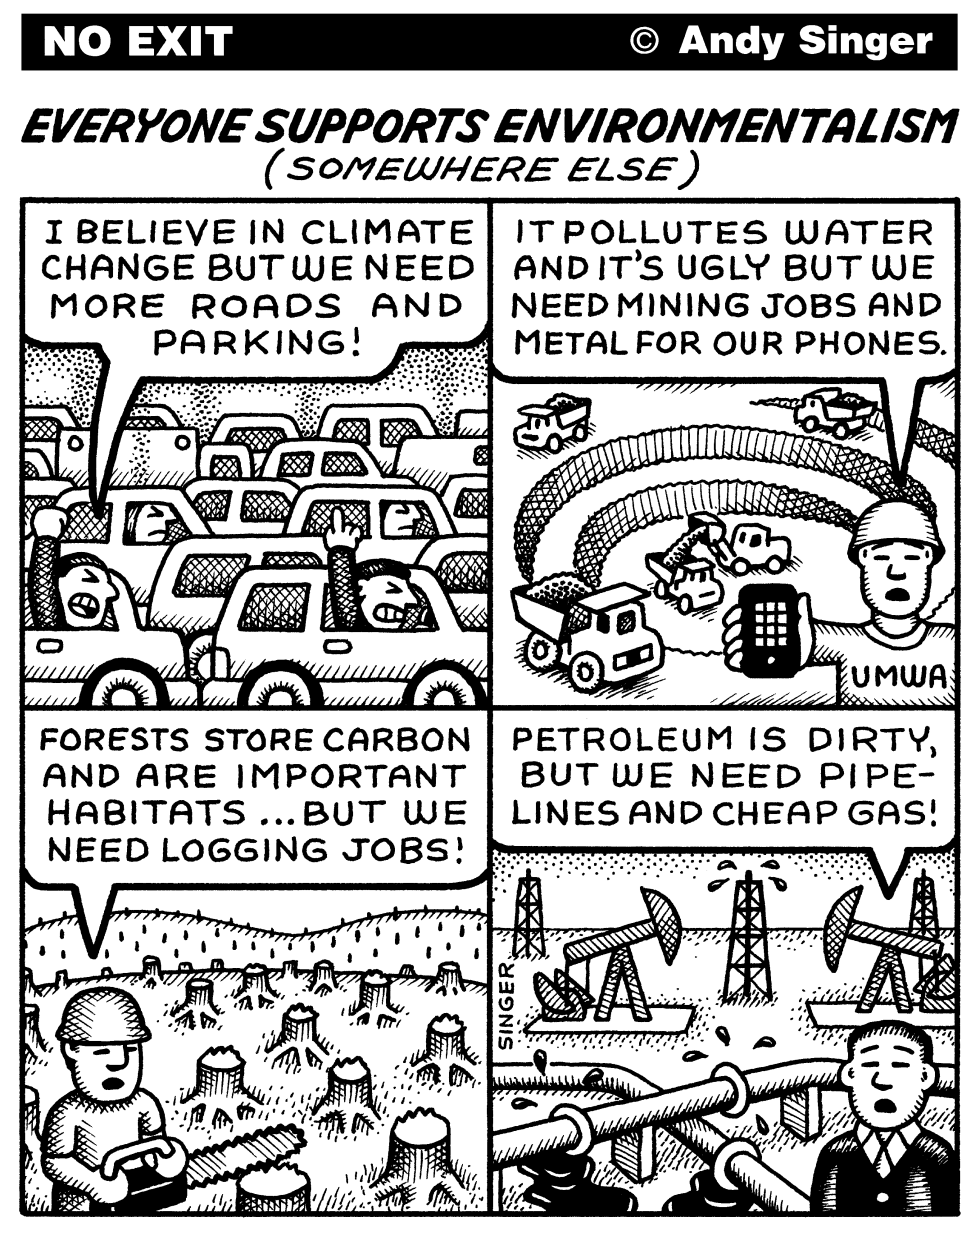 EVERYONE SUPPORTS ENVIRONMENTALI- SM SOMEWHERE ELSE by Andy Singer